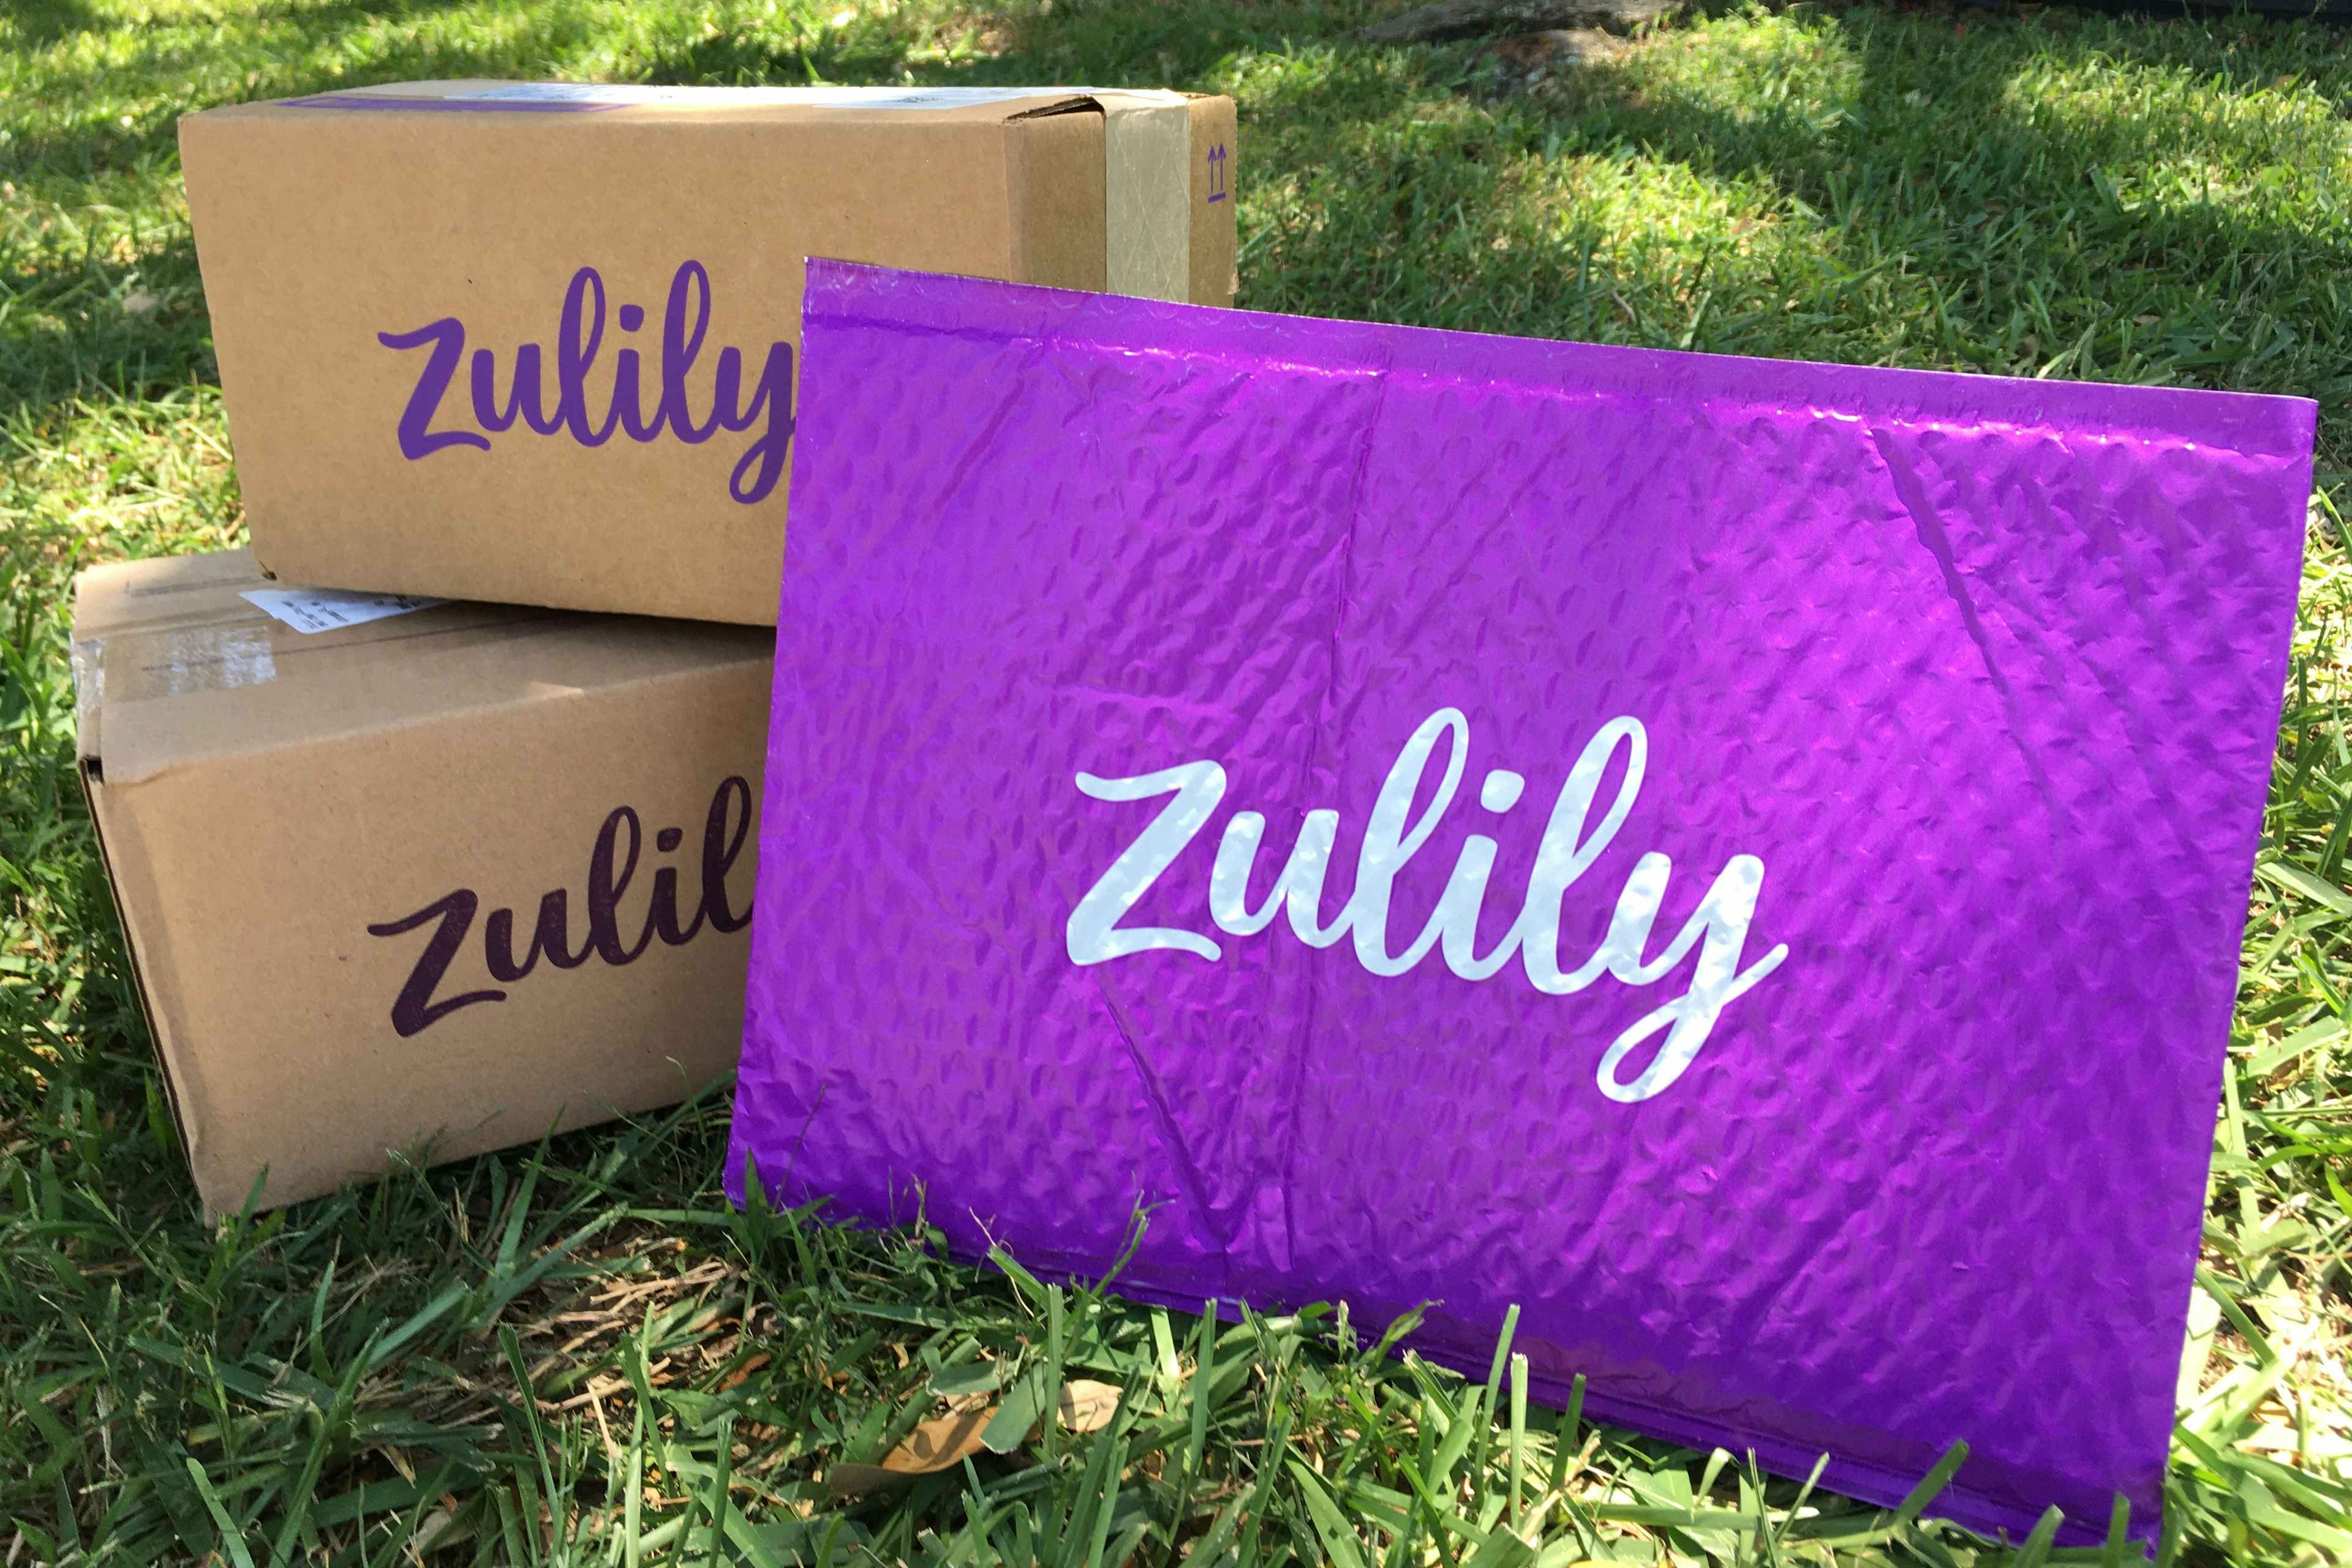 zulily-orb-box-bag-shipping-featured-photo-11